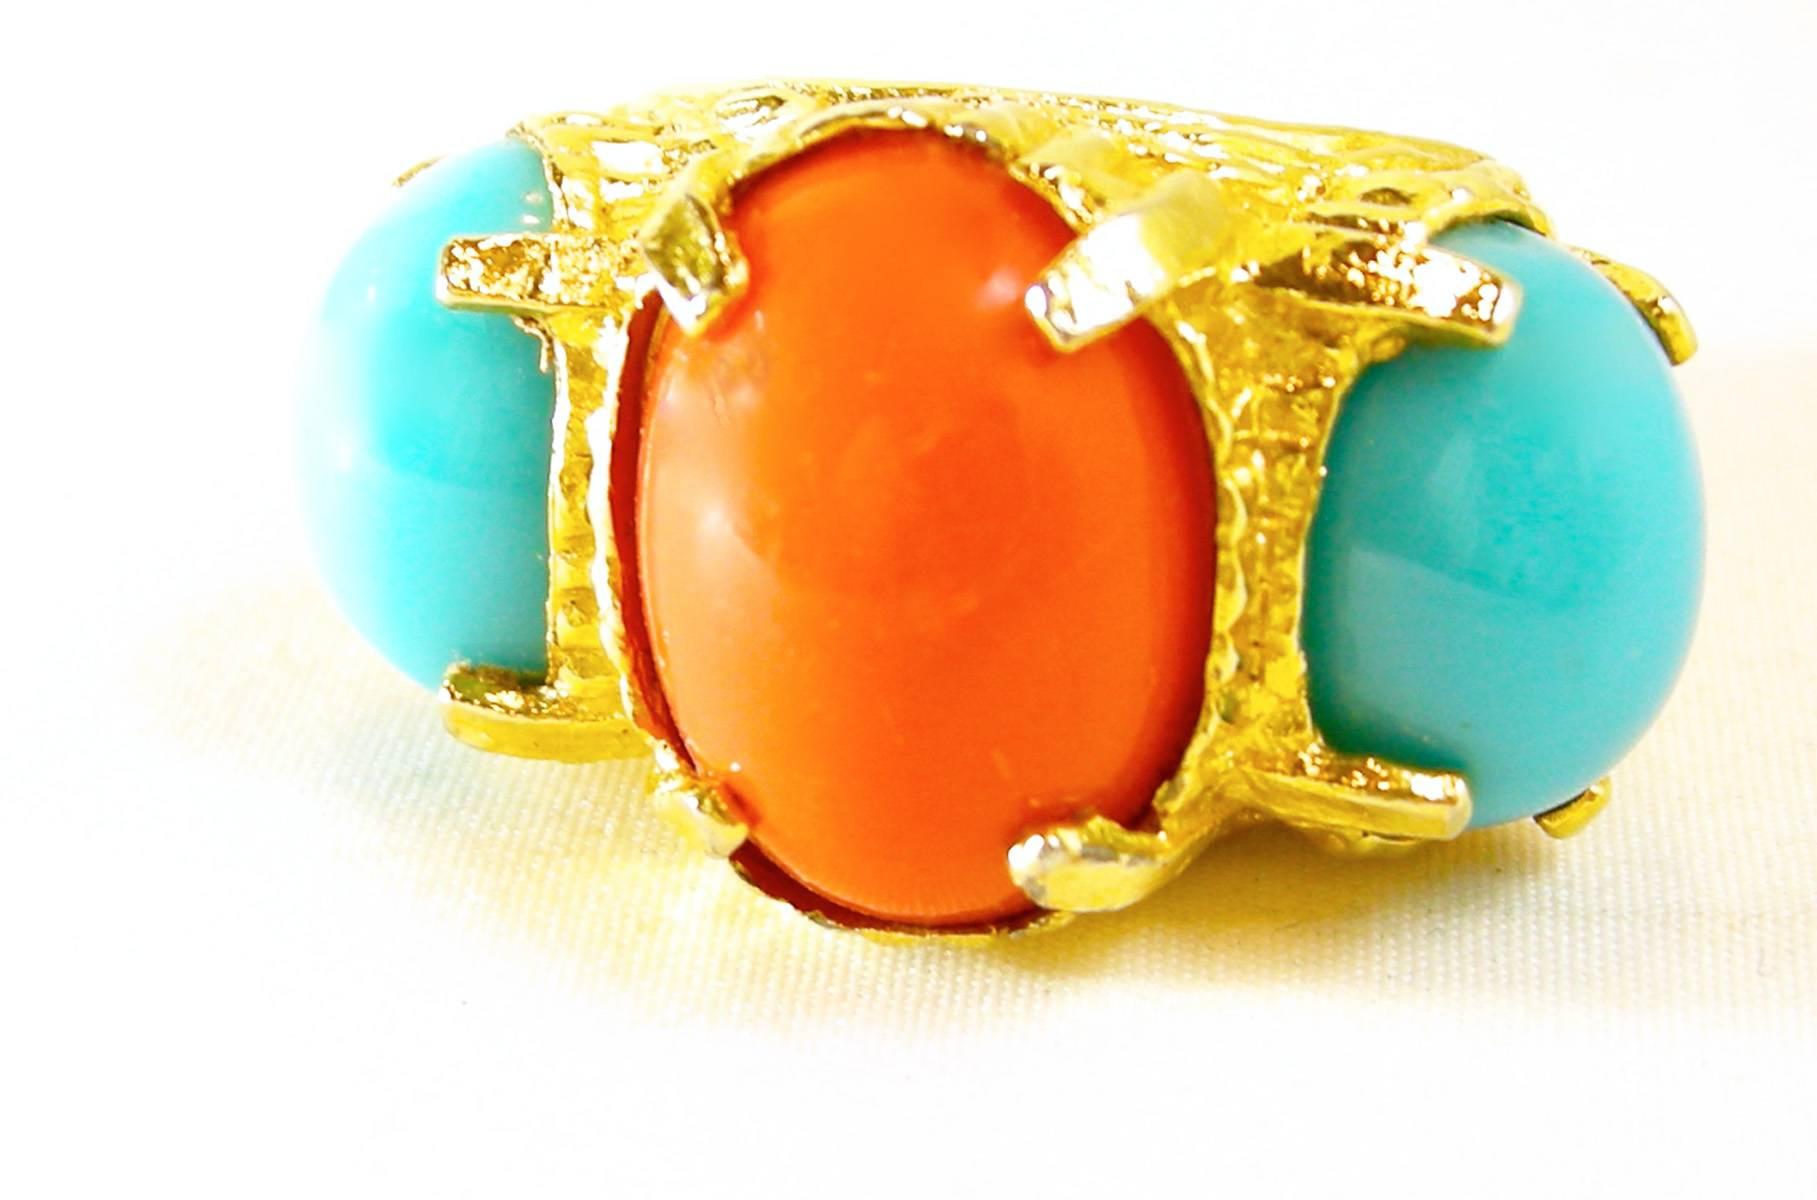 This vintage 1980s cocktail ring has faux coral and turquoise cabochon stones. It is set in a gold tone setting with a weave design. The top measures 2” across and 1” wide. The ring is a size 8, unsigned and in excellent condition.